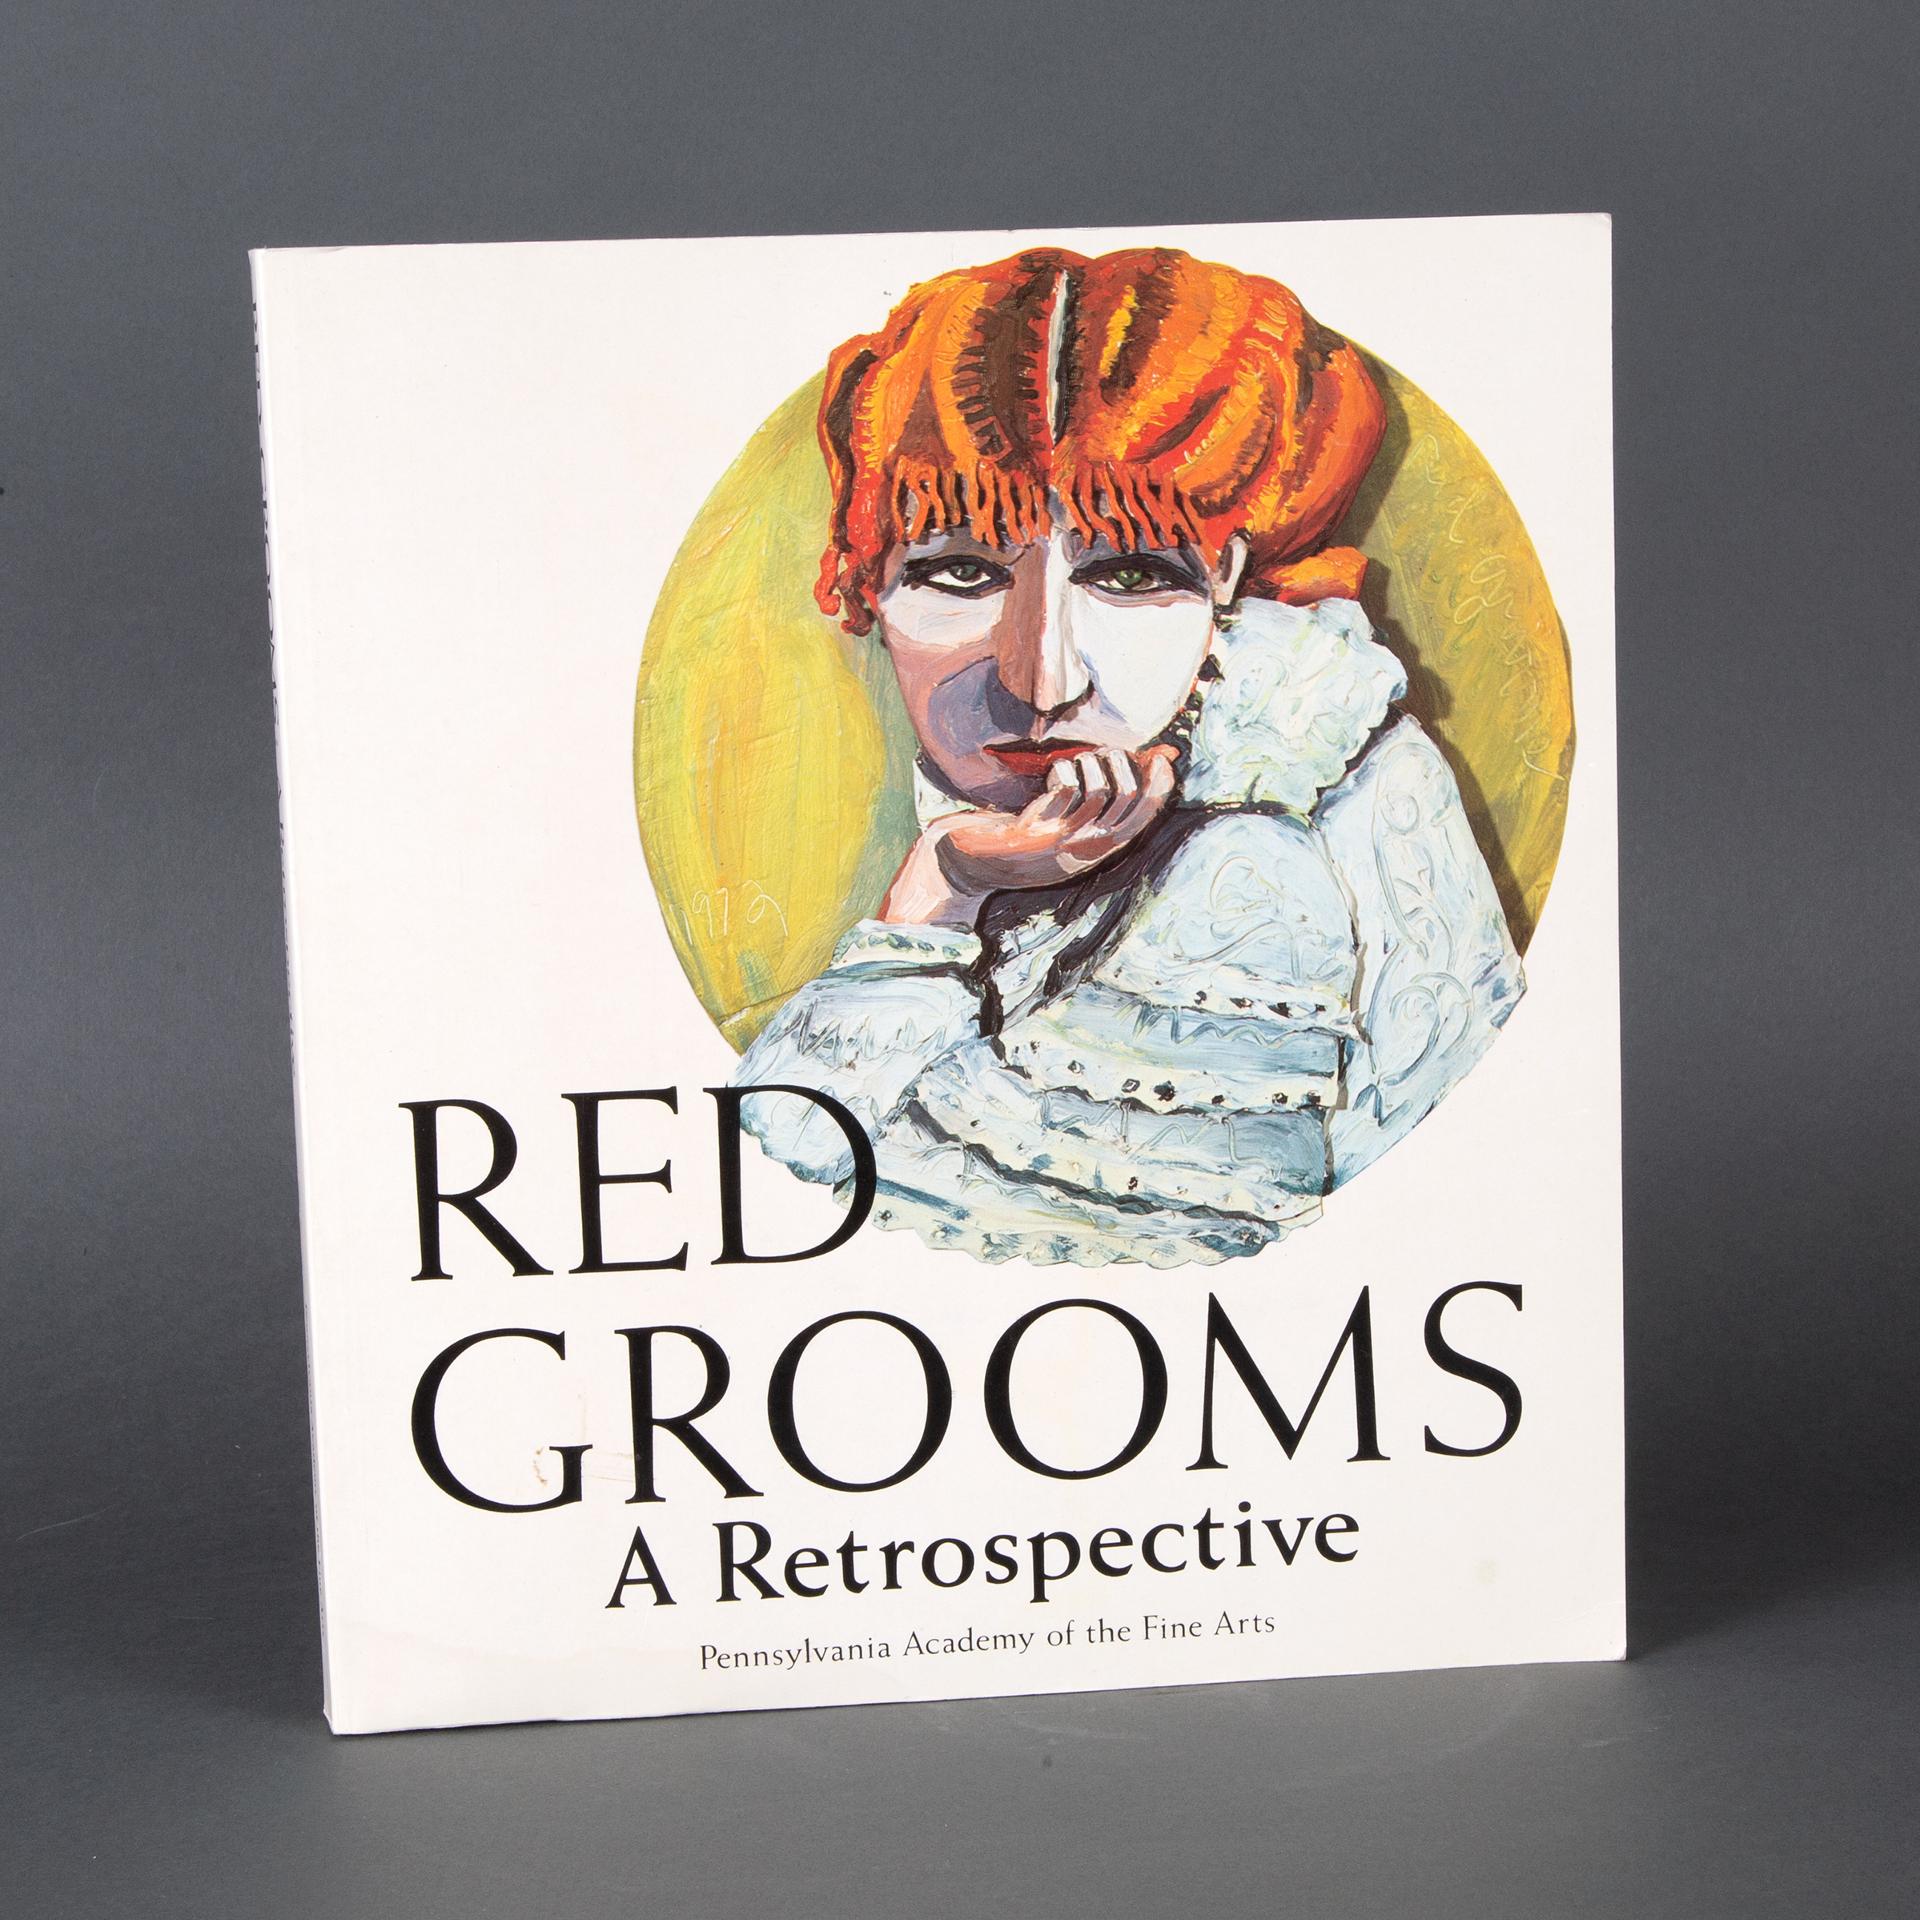 Red Grooms - Exhibition Catalogue With Hand Drawn Self Portrait Caricature